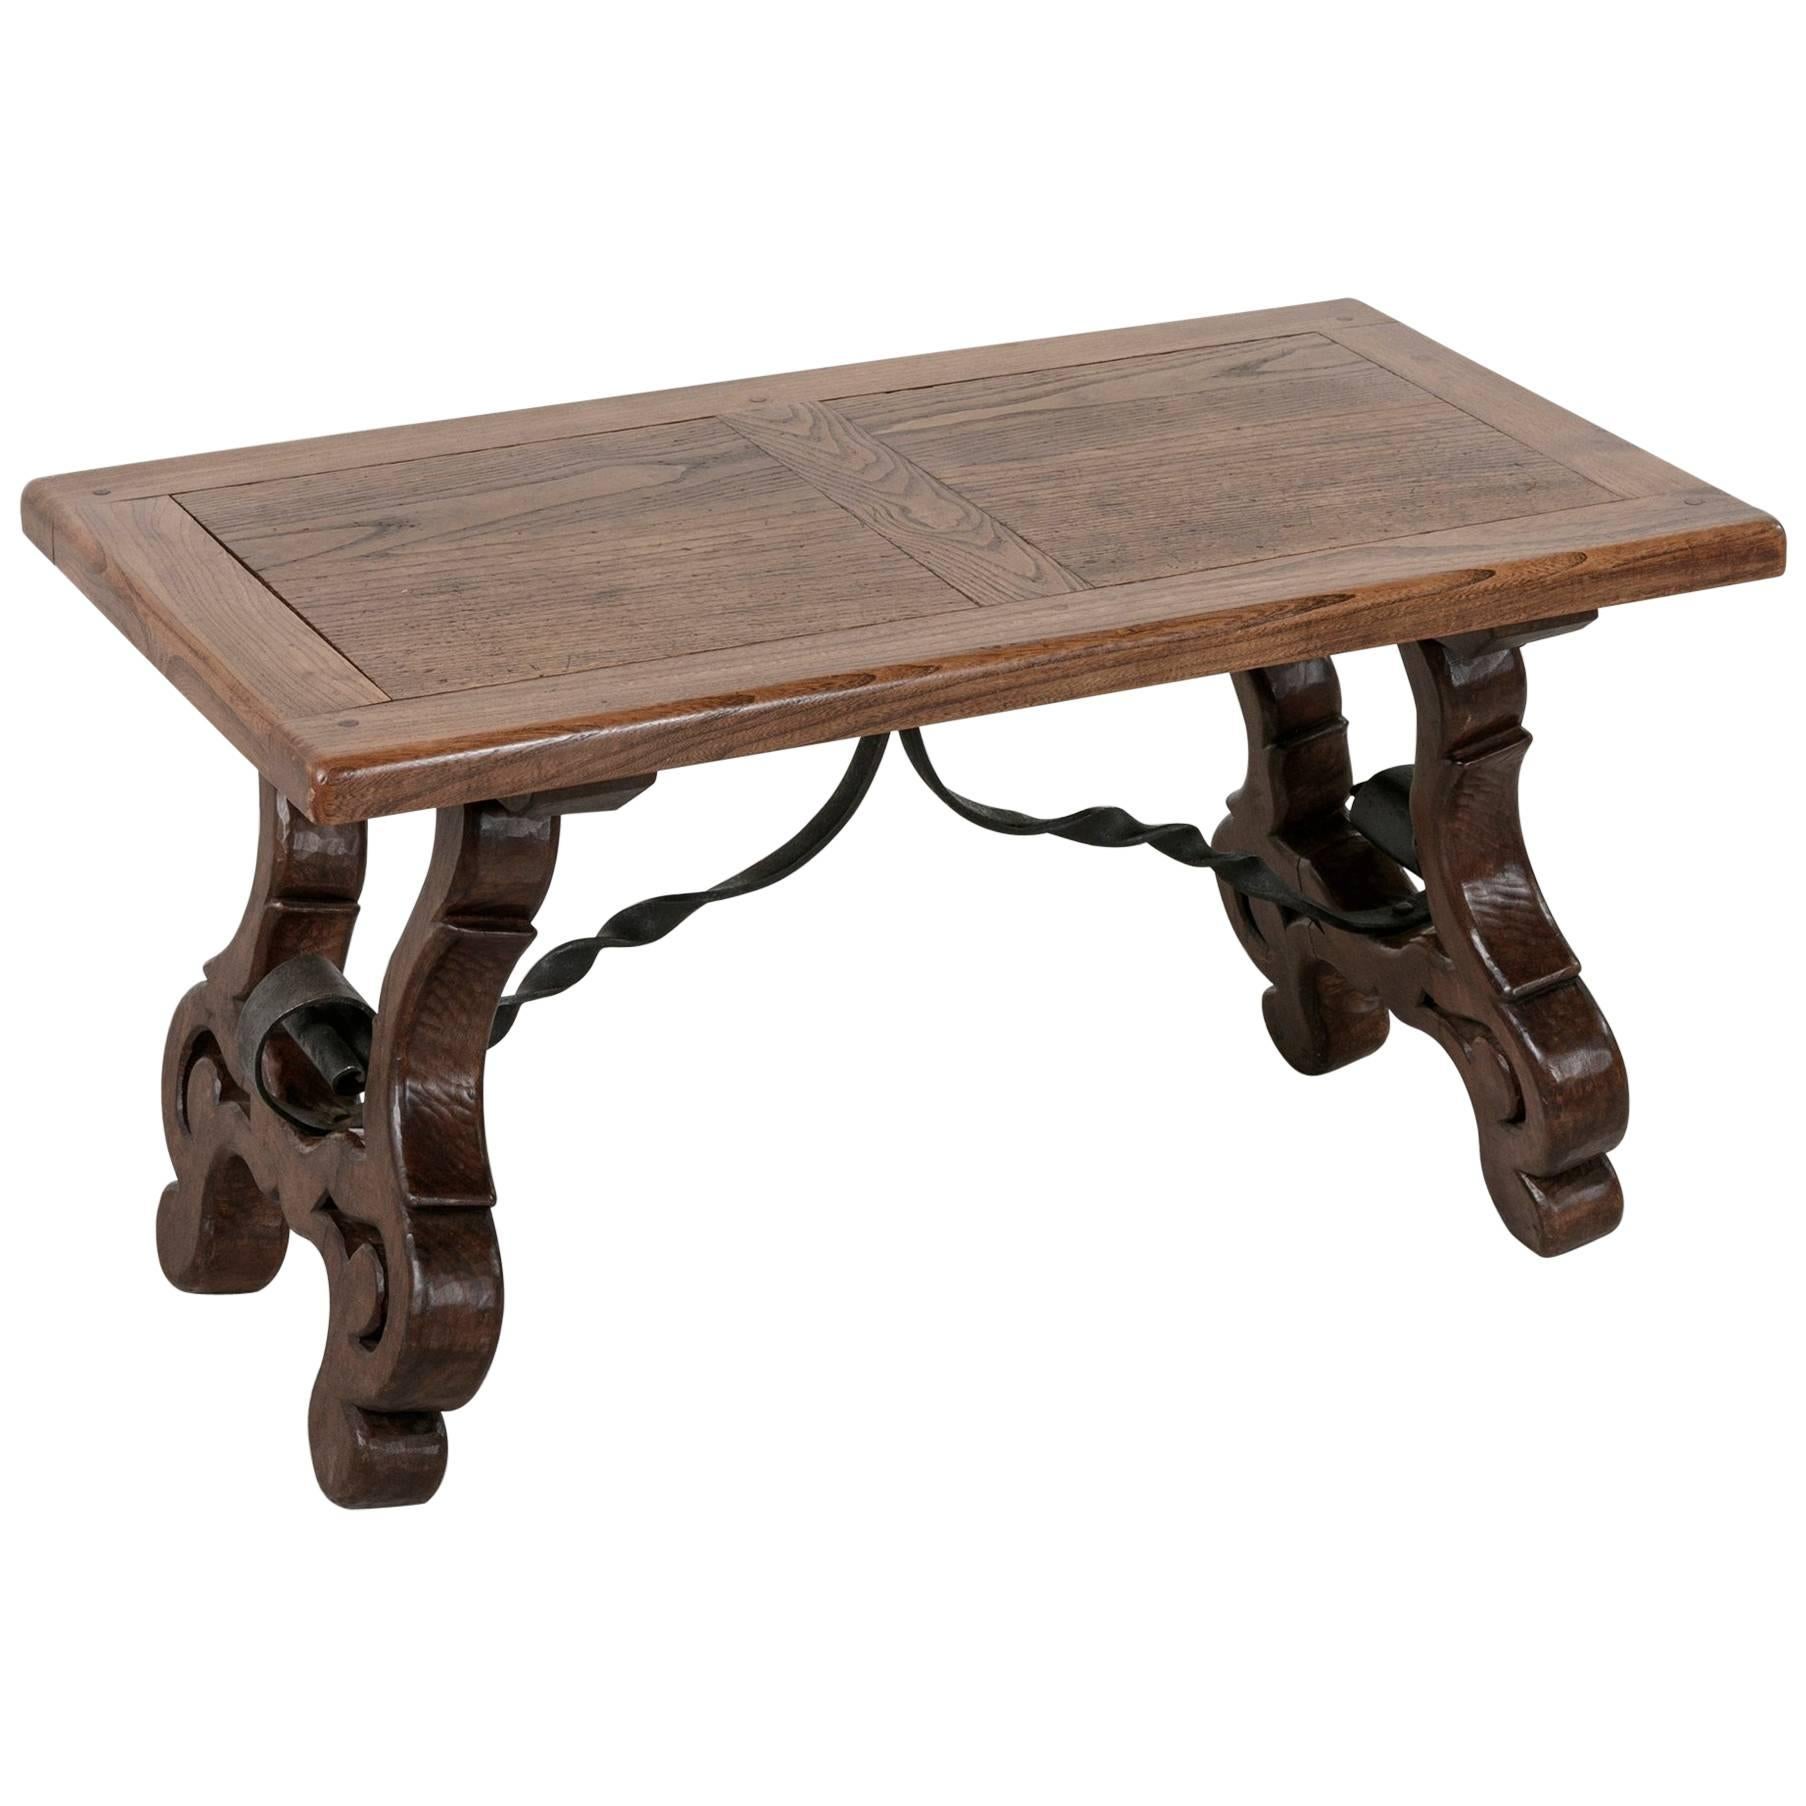 Early 20th Century Spanish Style Oak Coffee Table or Bench with Iron Stretcher